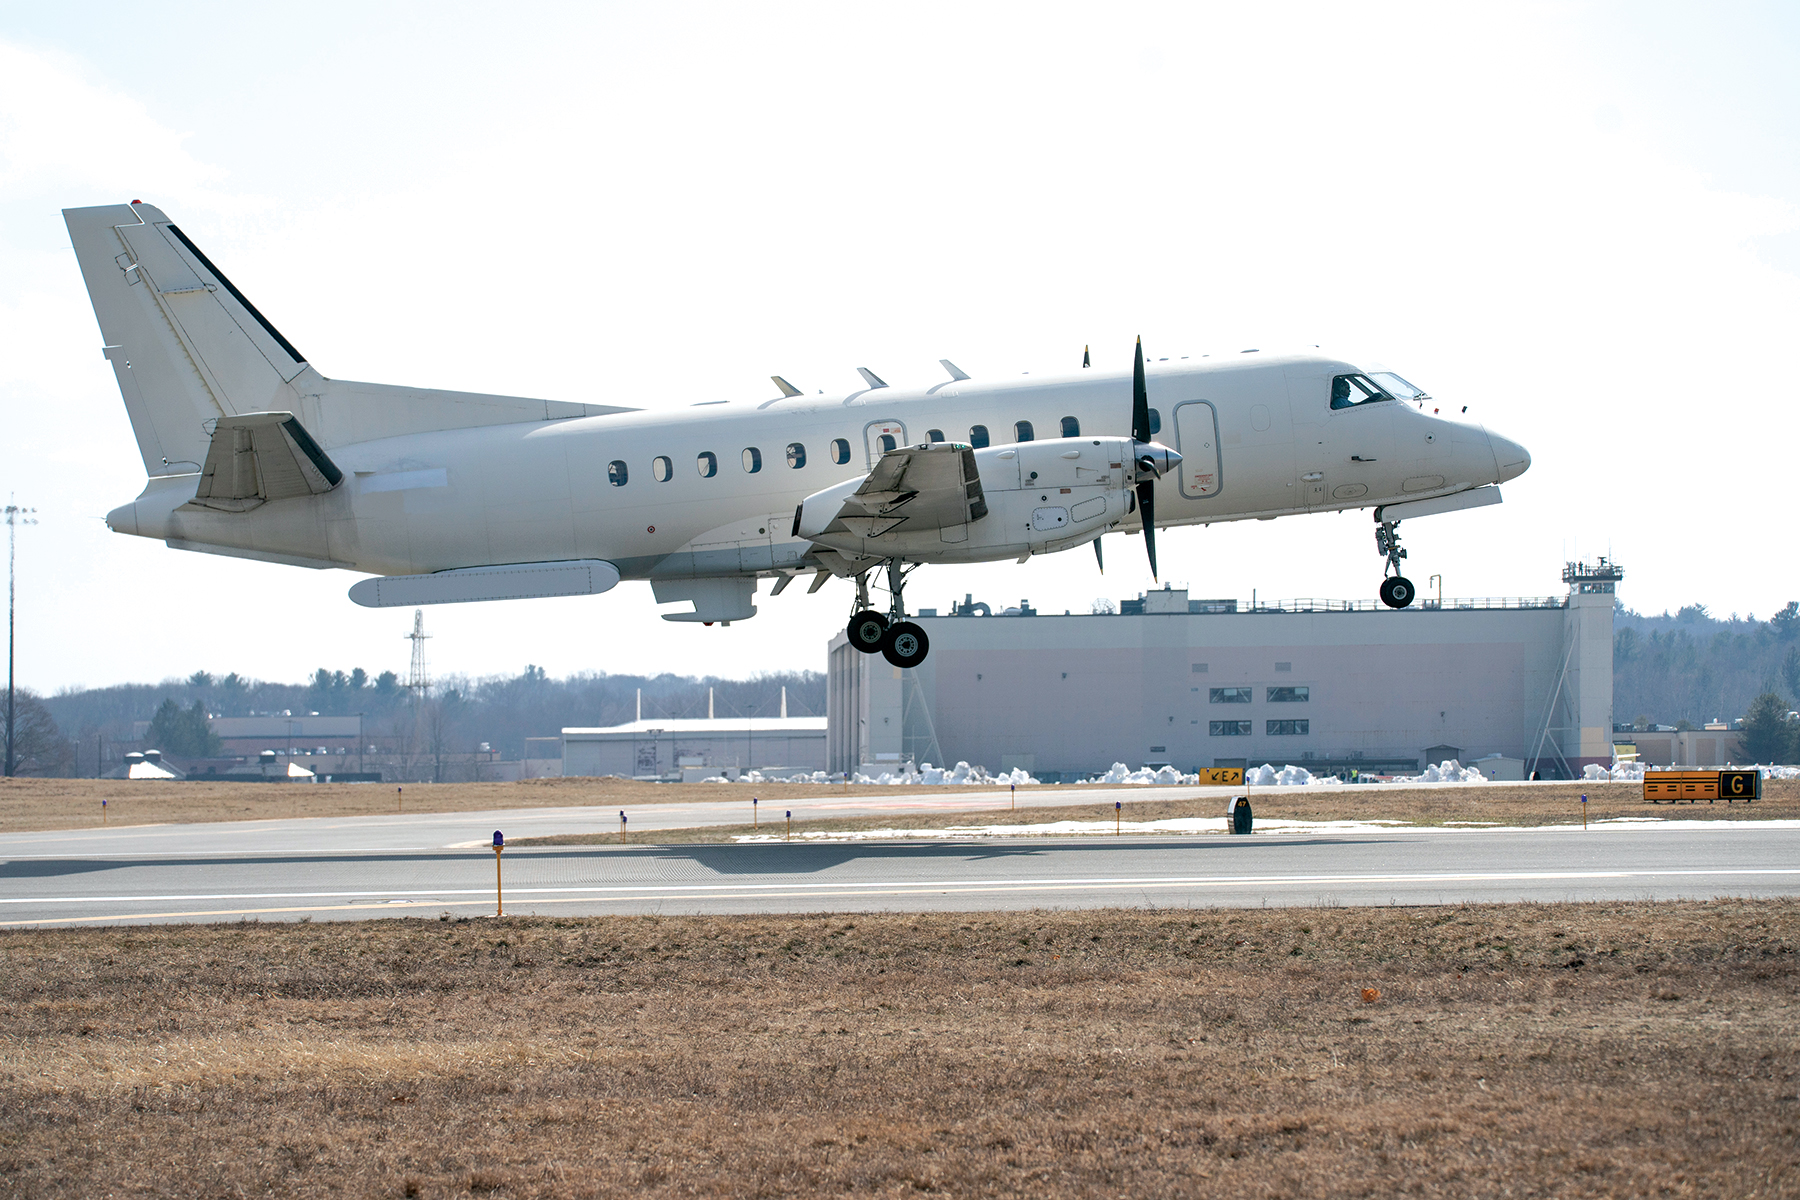 The Saab 340B aircraft outfitted with the Airborne Radar Testbed takes off.